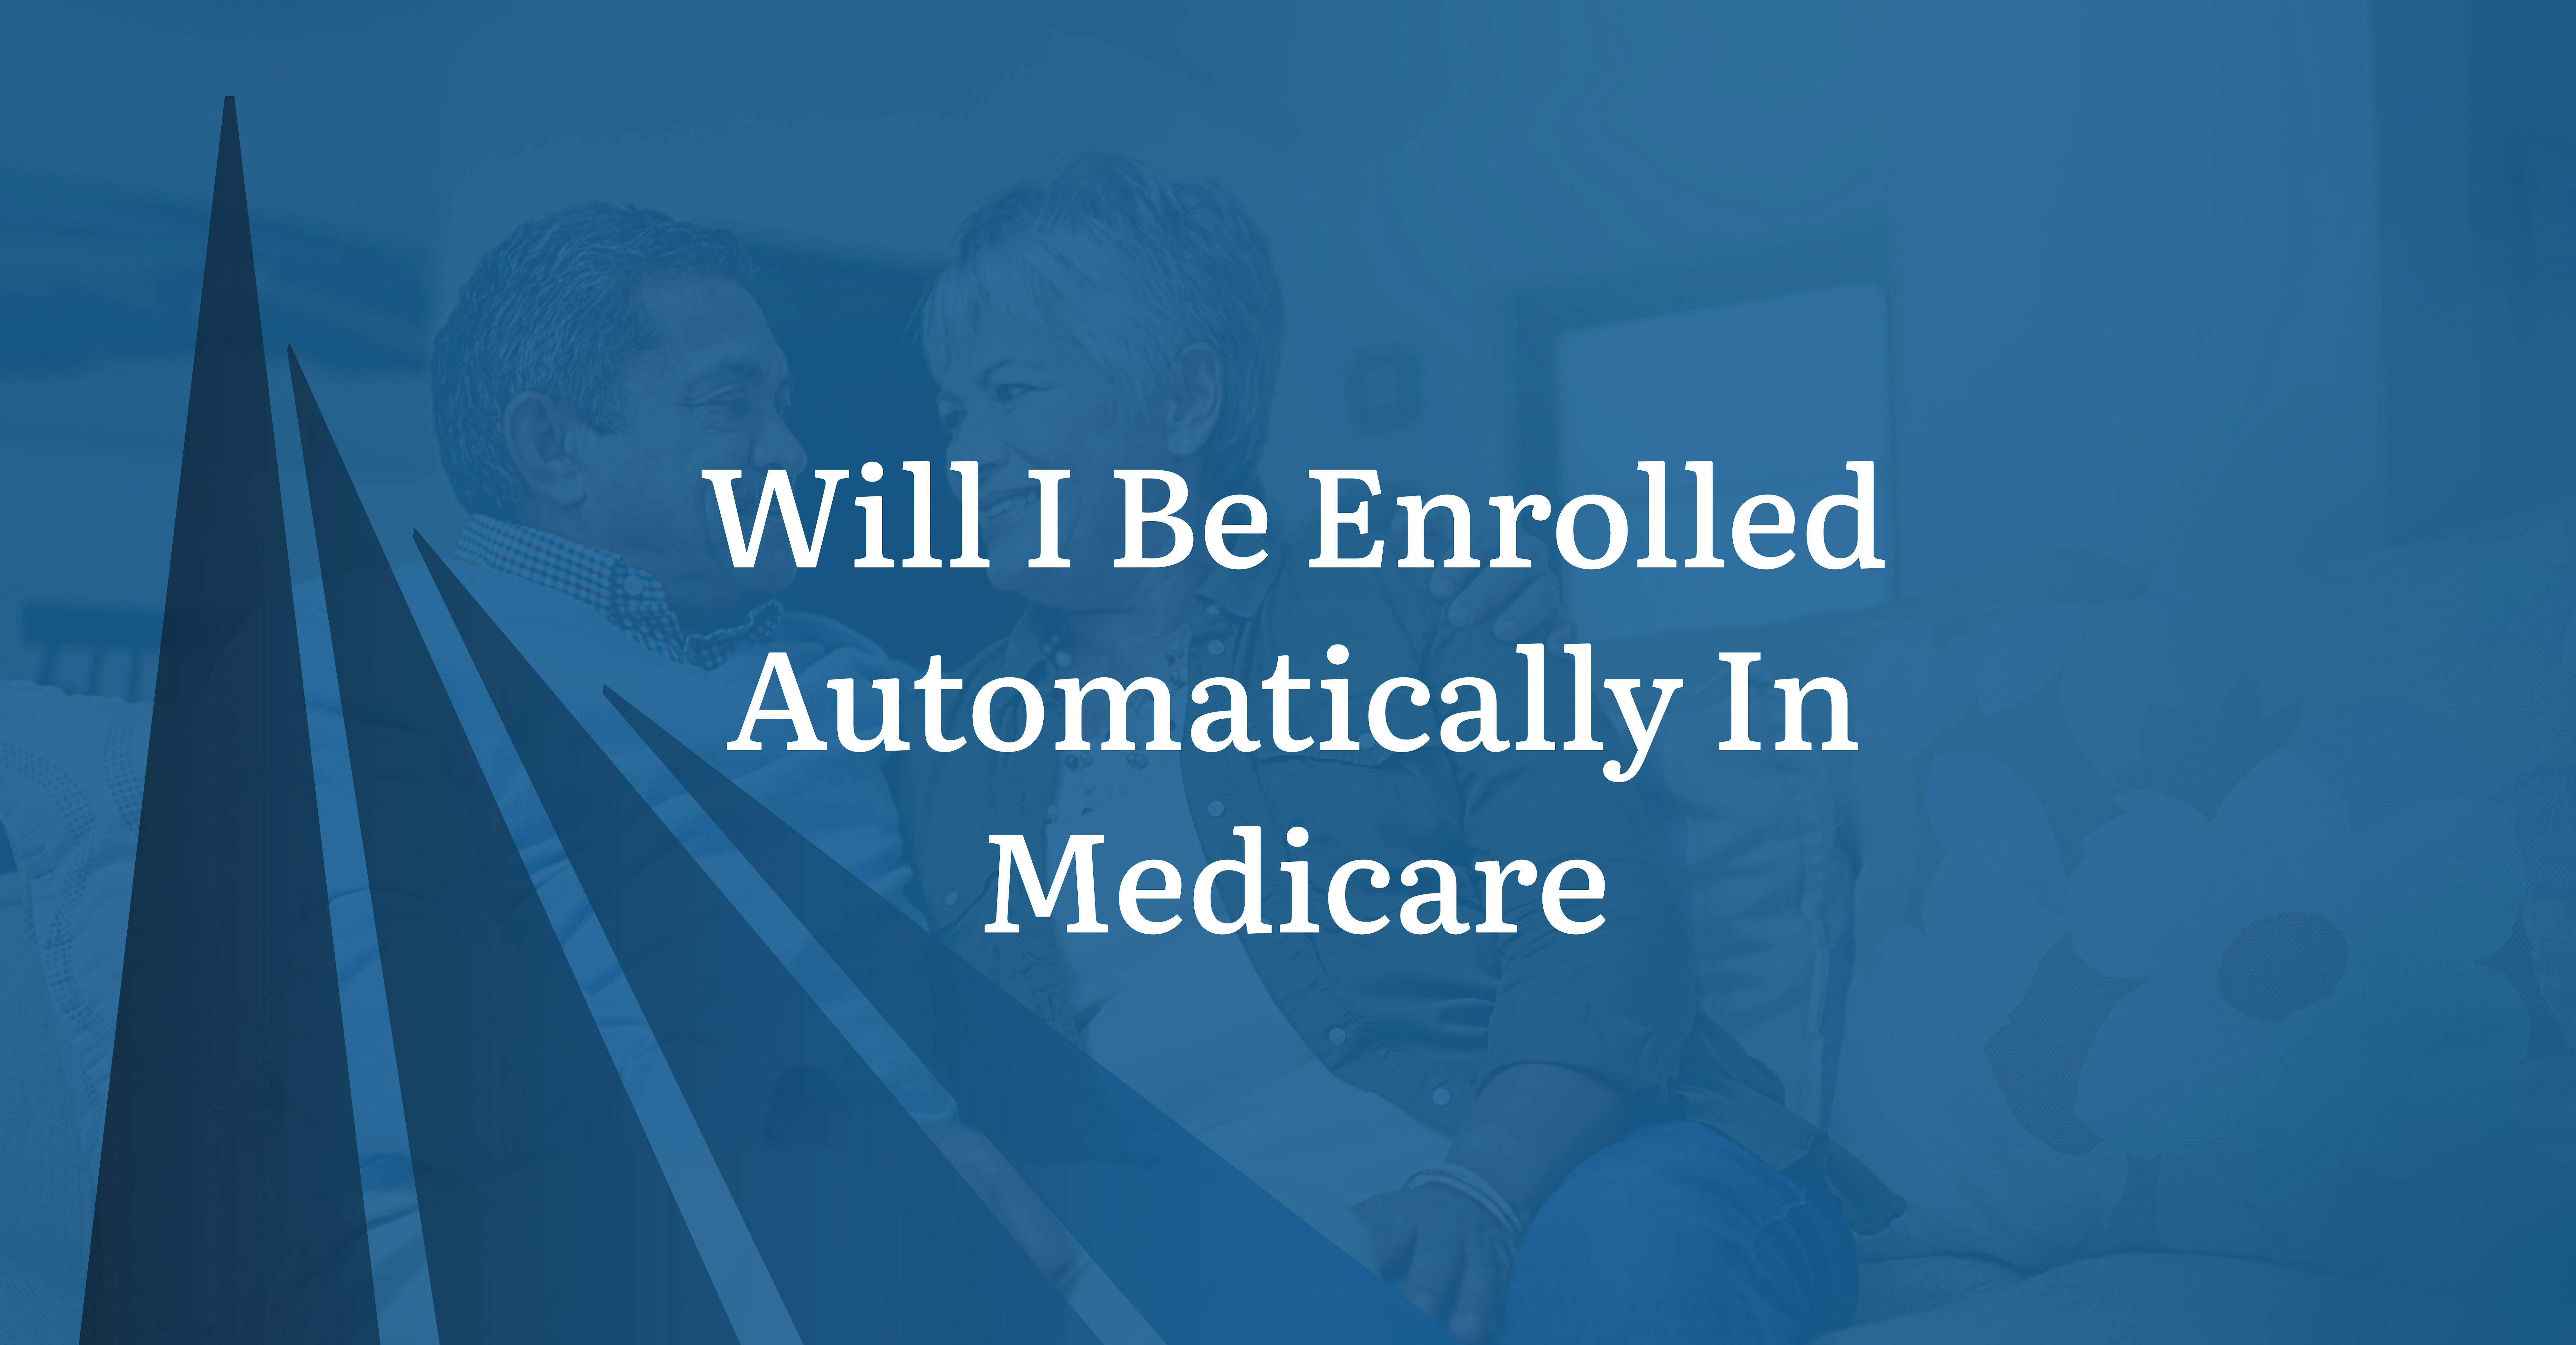 Will I Be Enrolled Automatically In Medicare